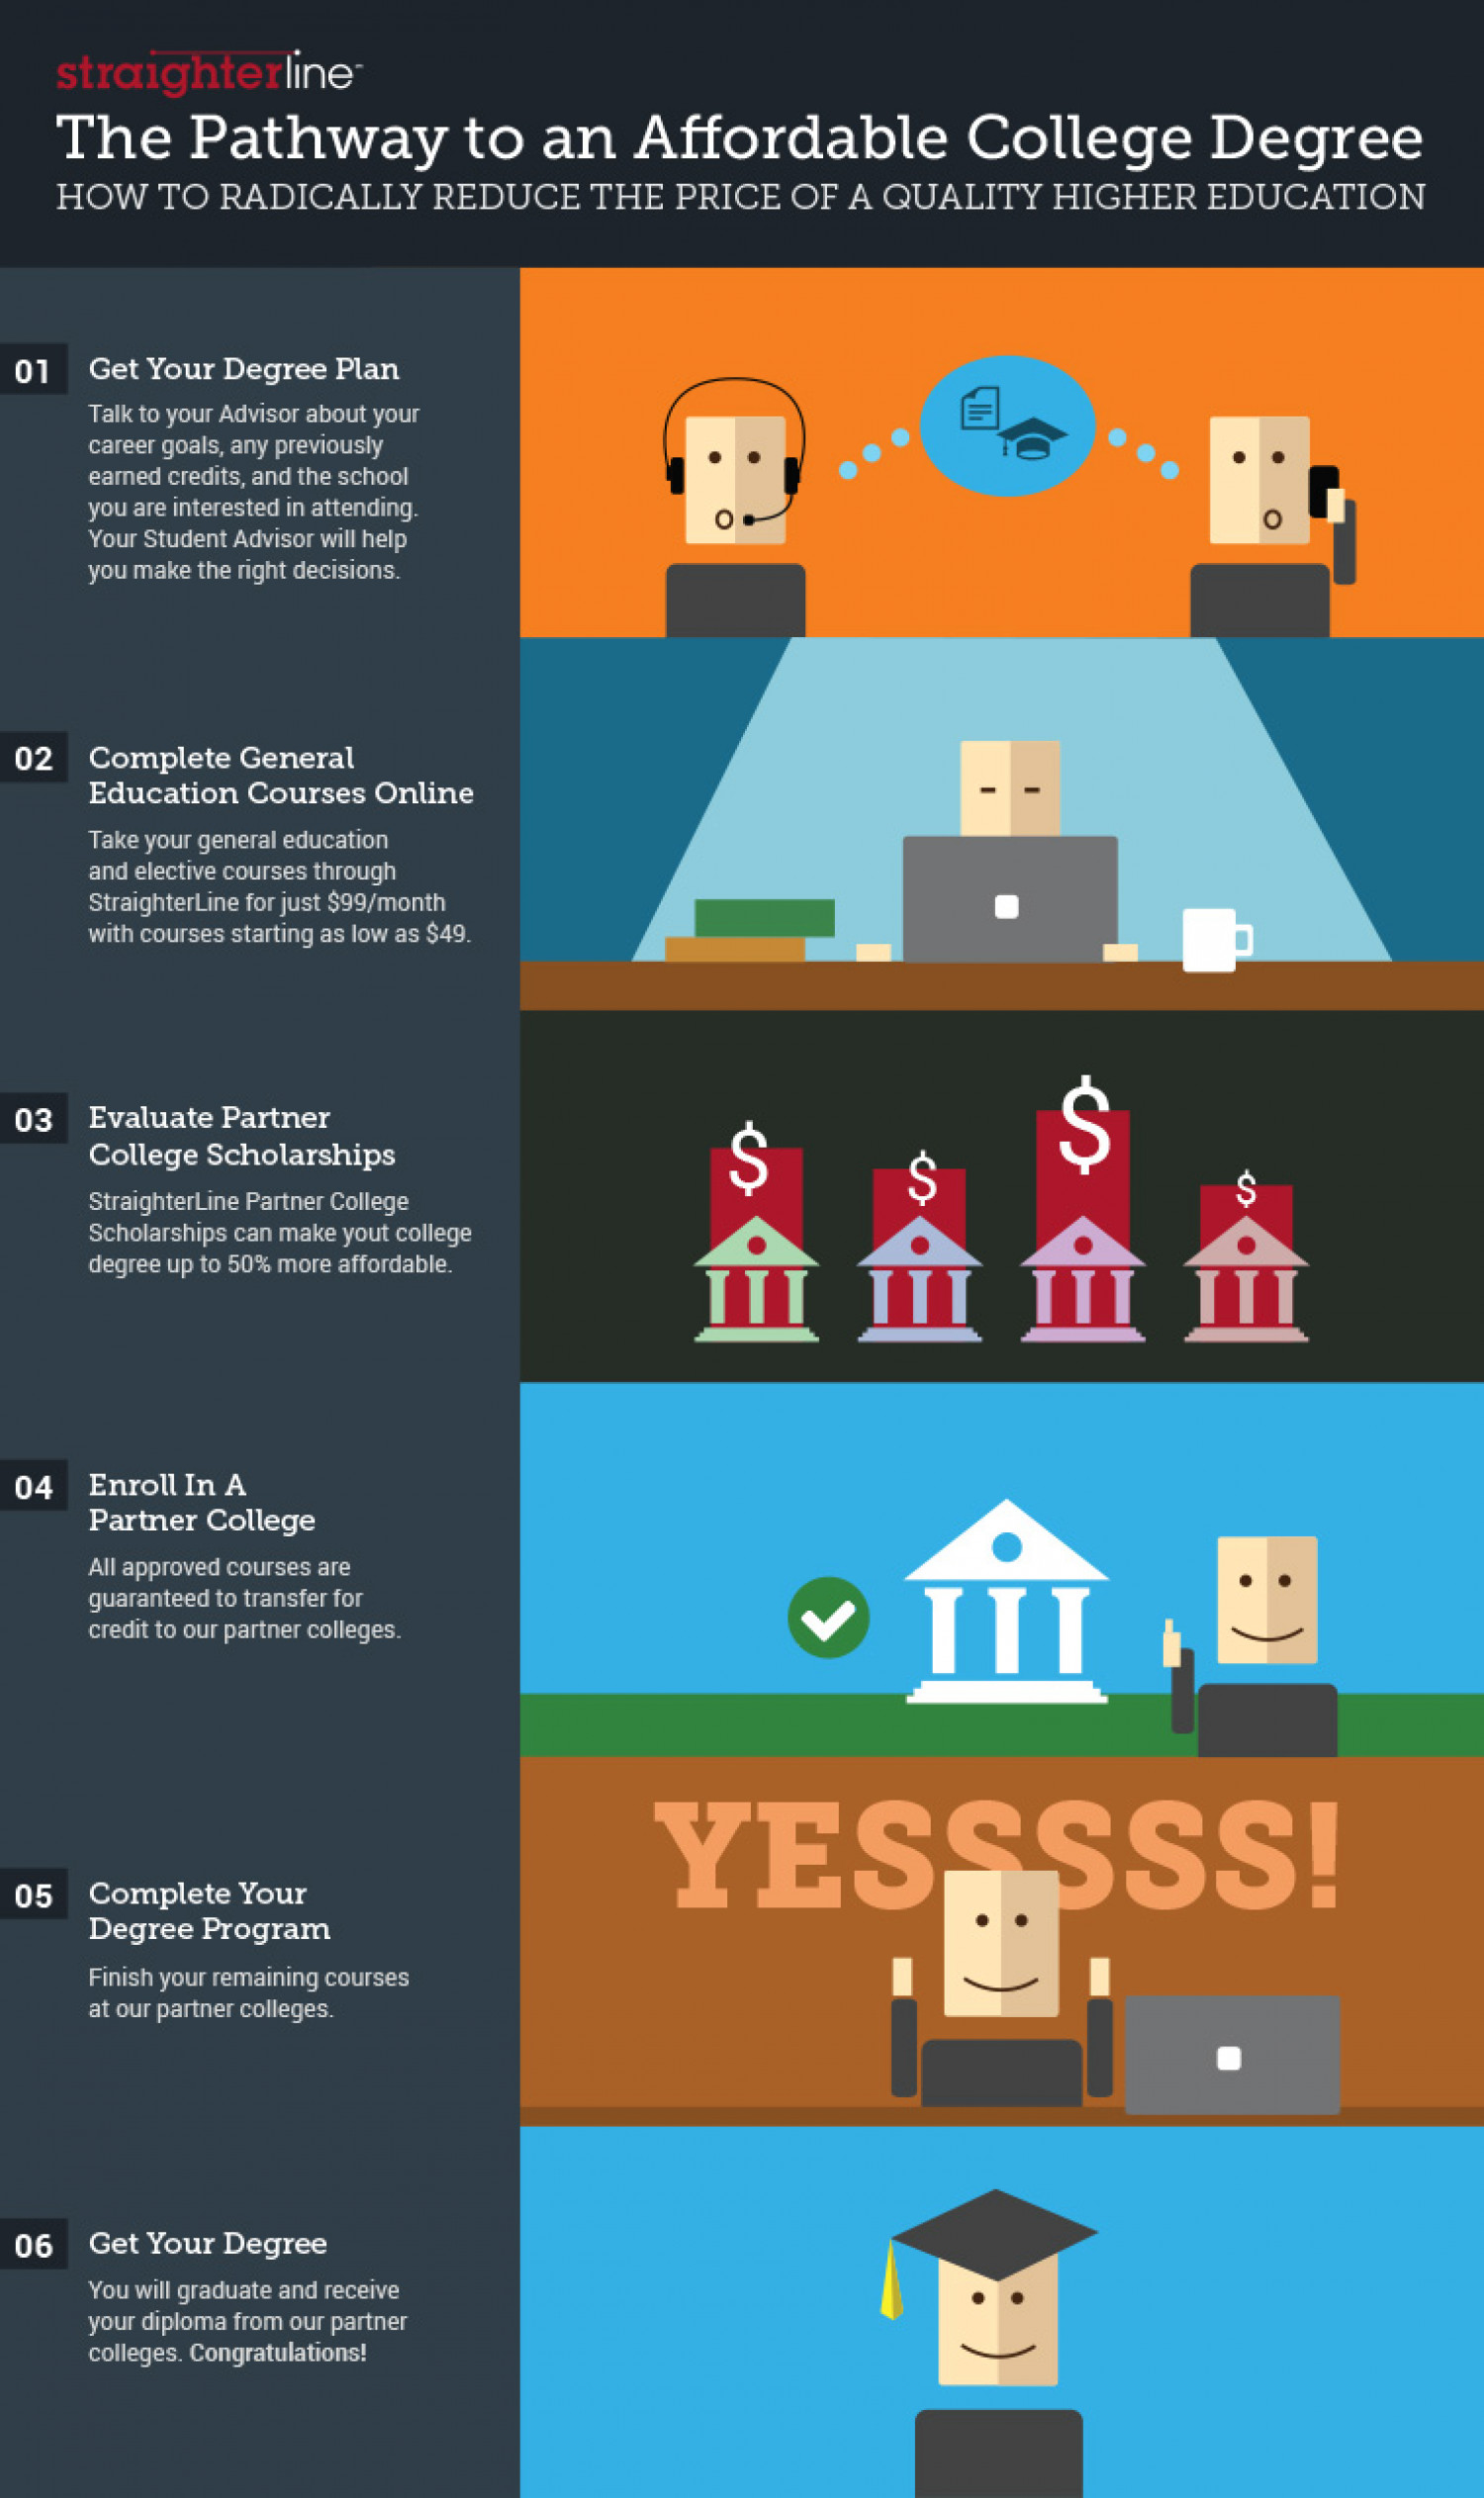 The Pathway to an Affordable College Degree Infographic